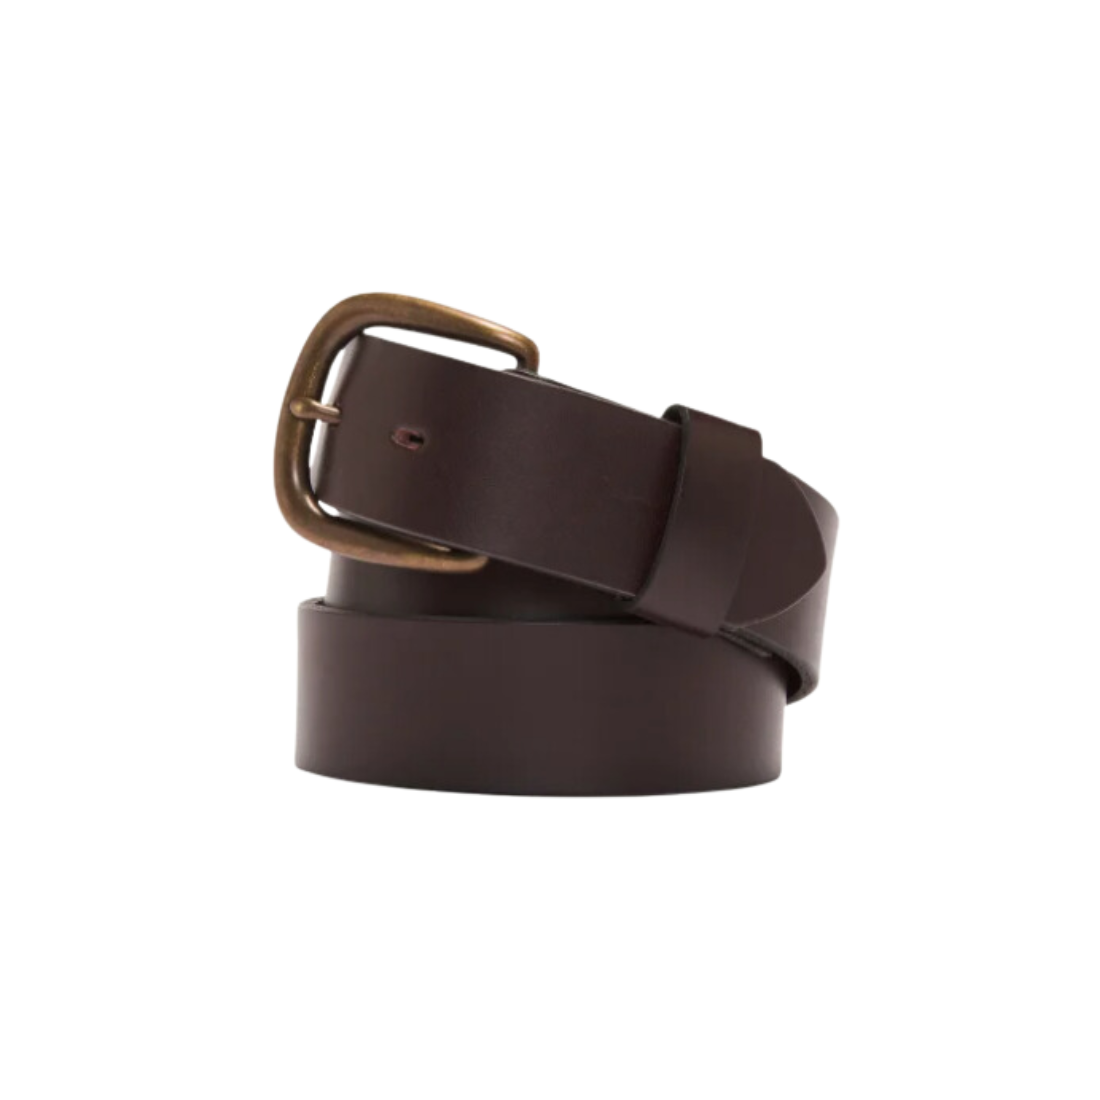 RM Williams Traditional Belt in Chestnut - Available at The Bloke Shop, south of Adelaide